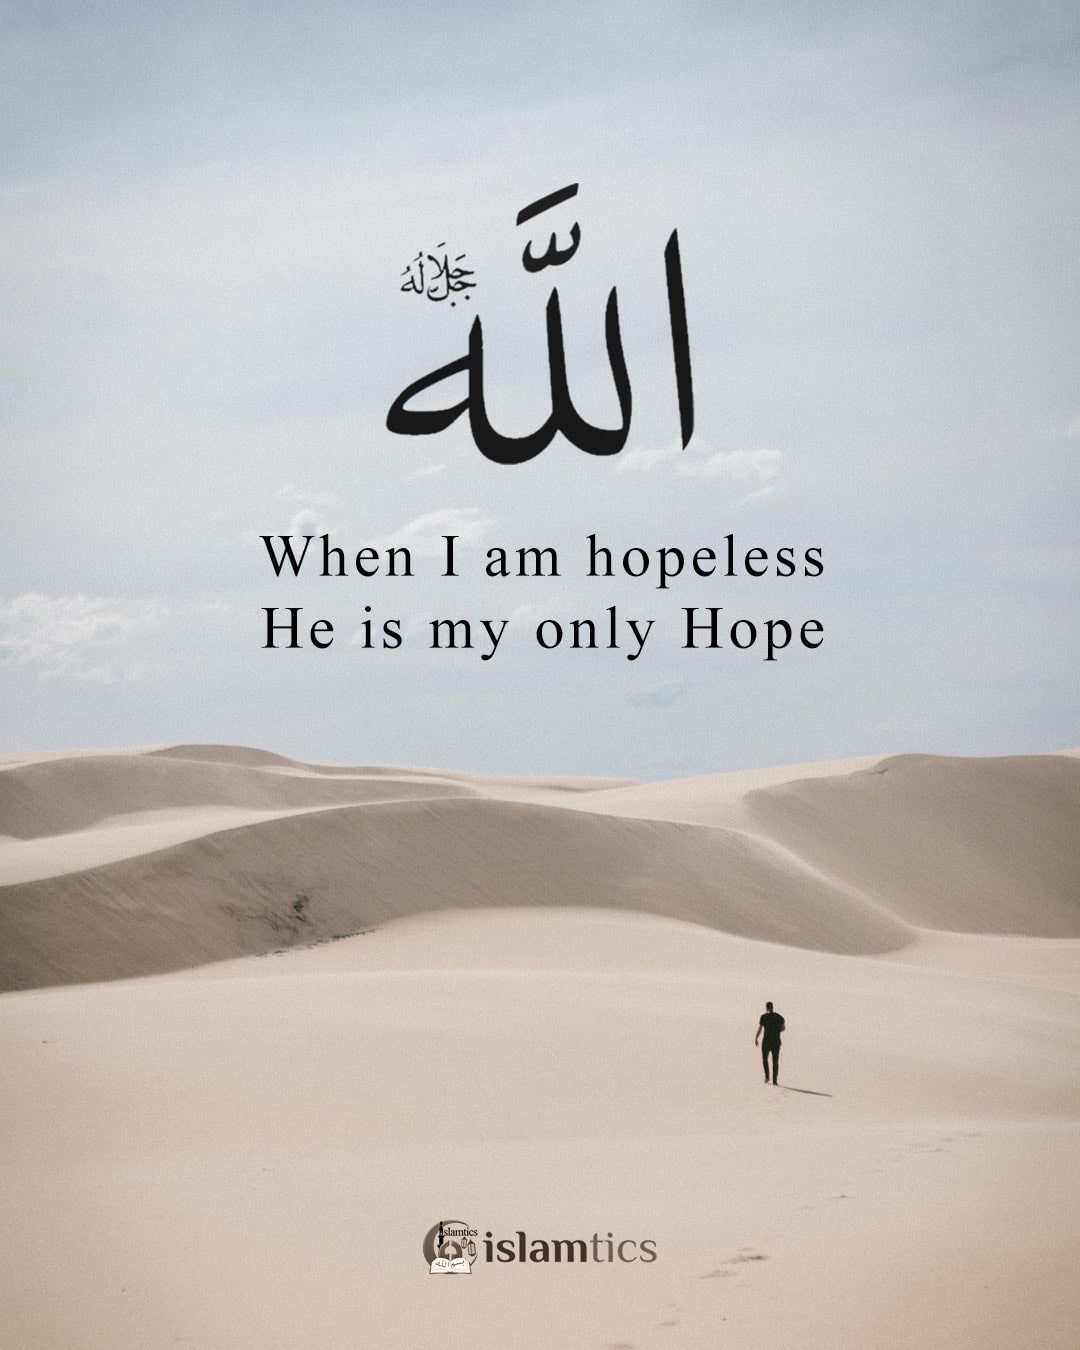 When I am hopeless, Allah is my only Hope.